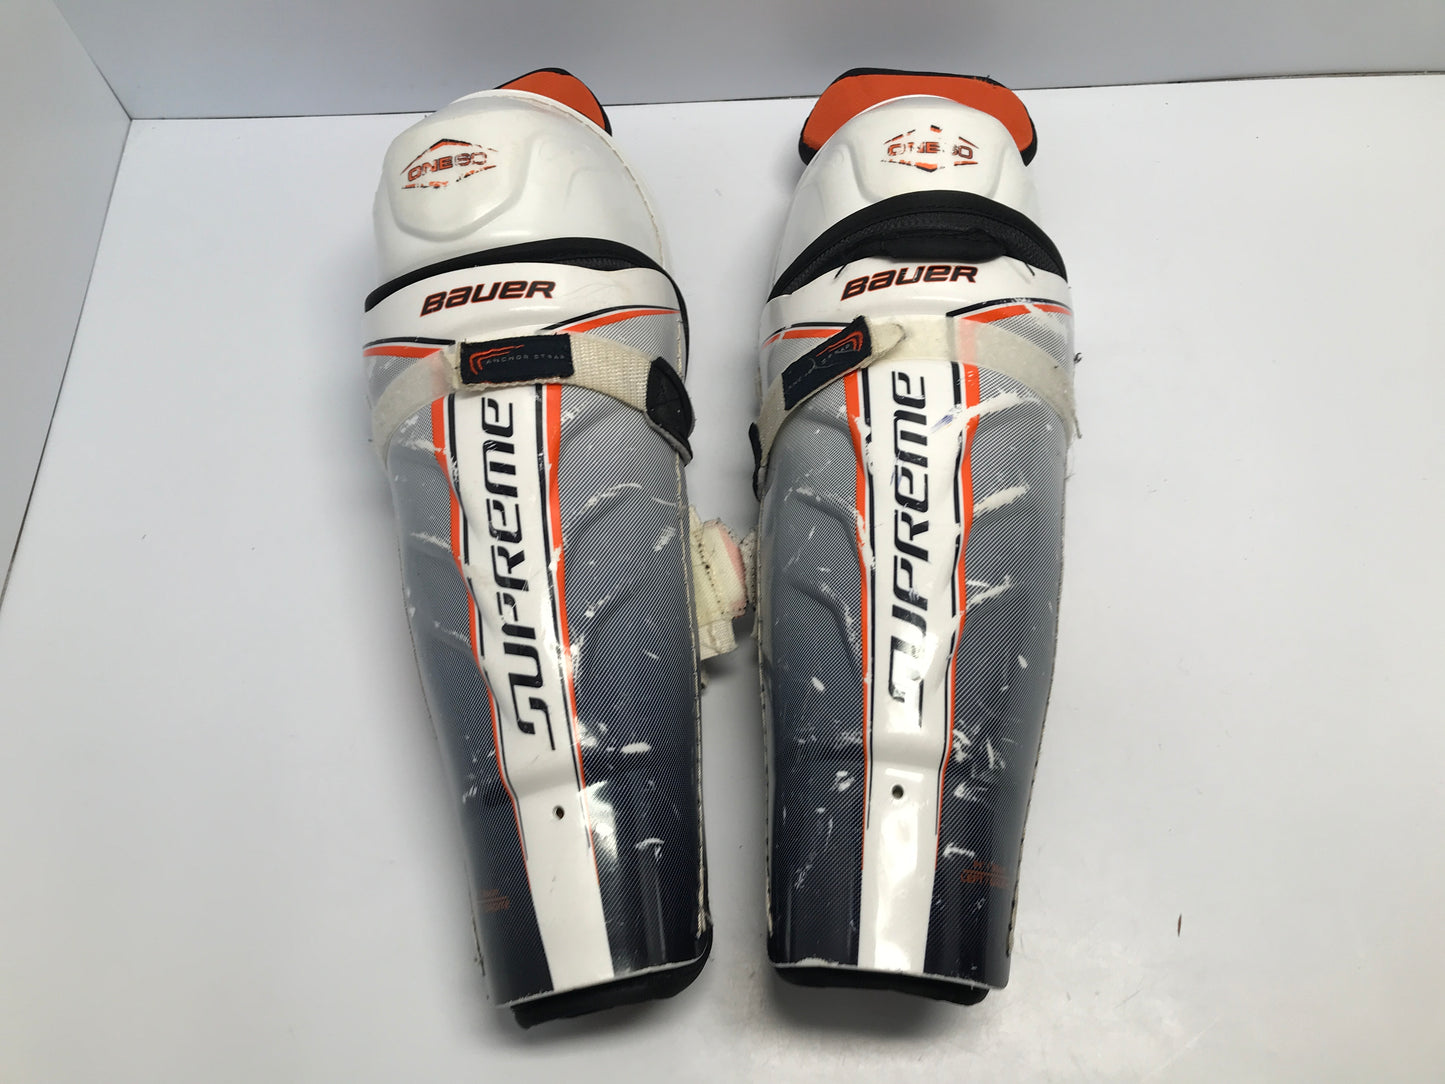 Hockey Shin Pads Men's Senior 14in Bauer Supreme One 60 Calf Wrap With Removable Liner White Orange